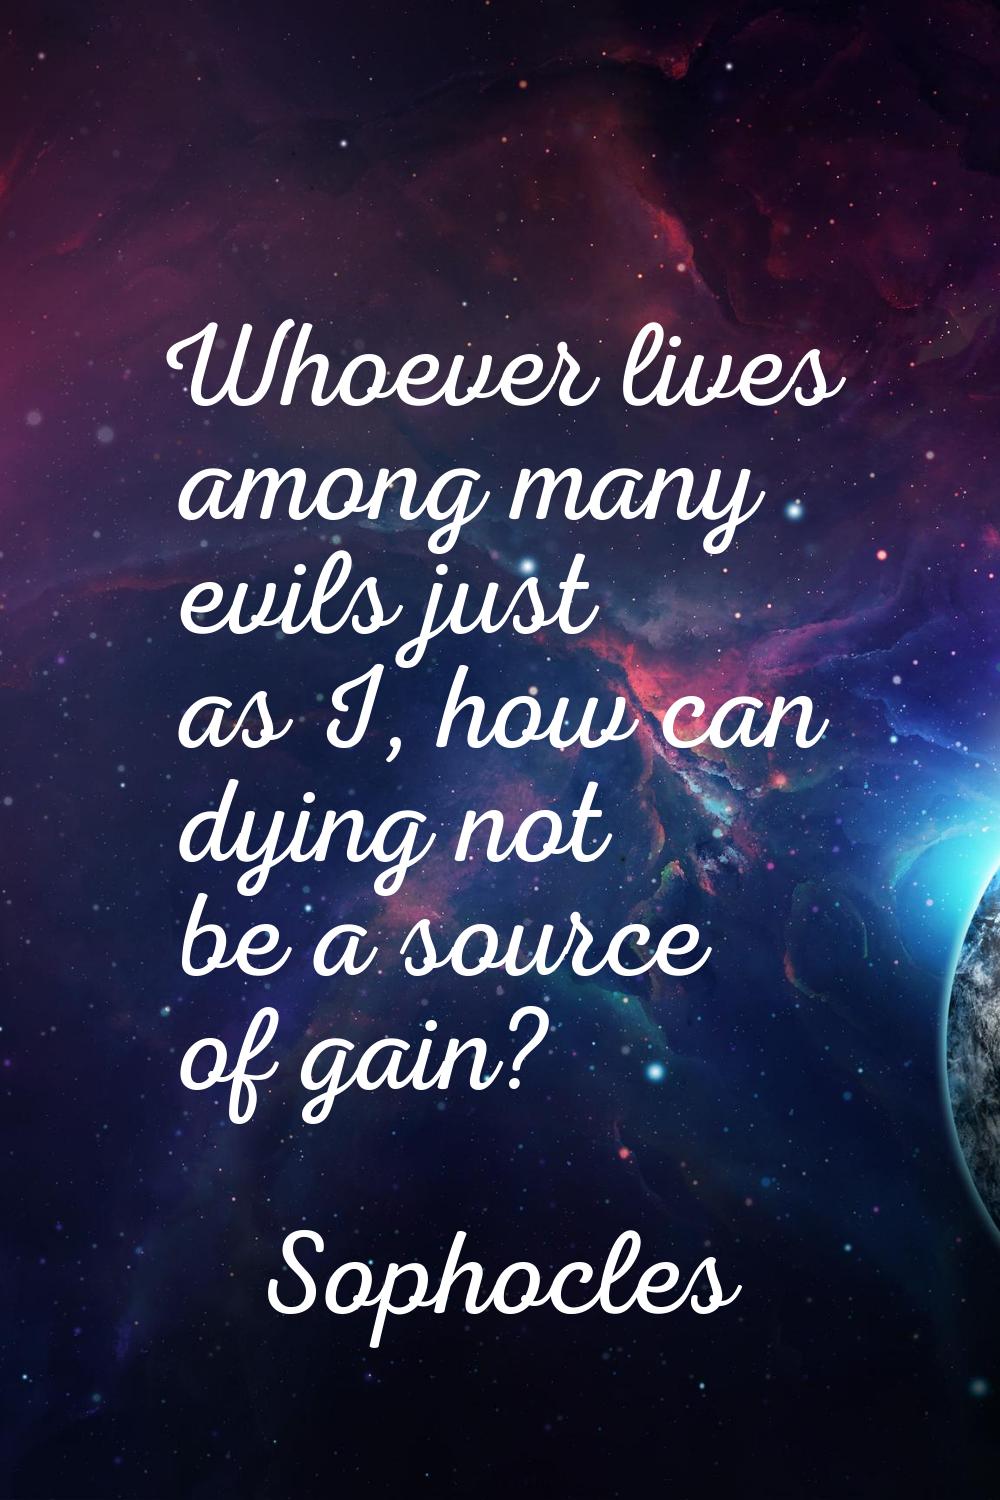 Whoever lives among many evils just as I, how can dying not be a source of gain?